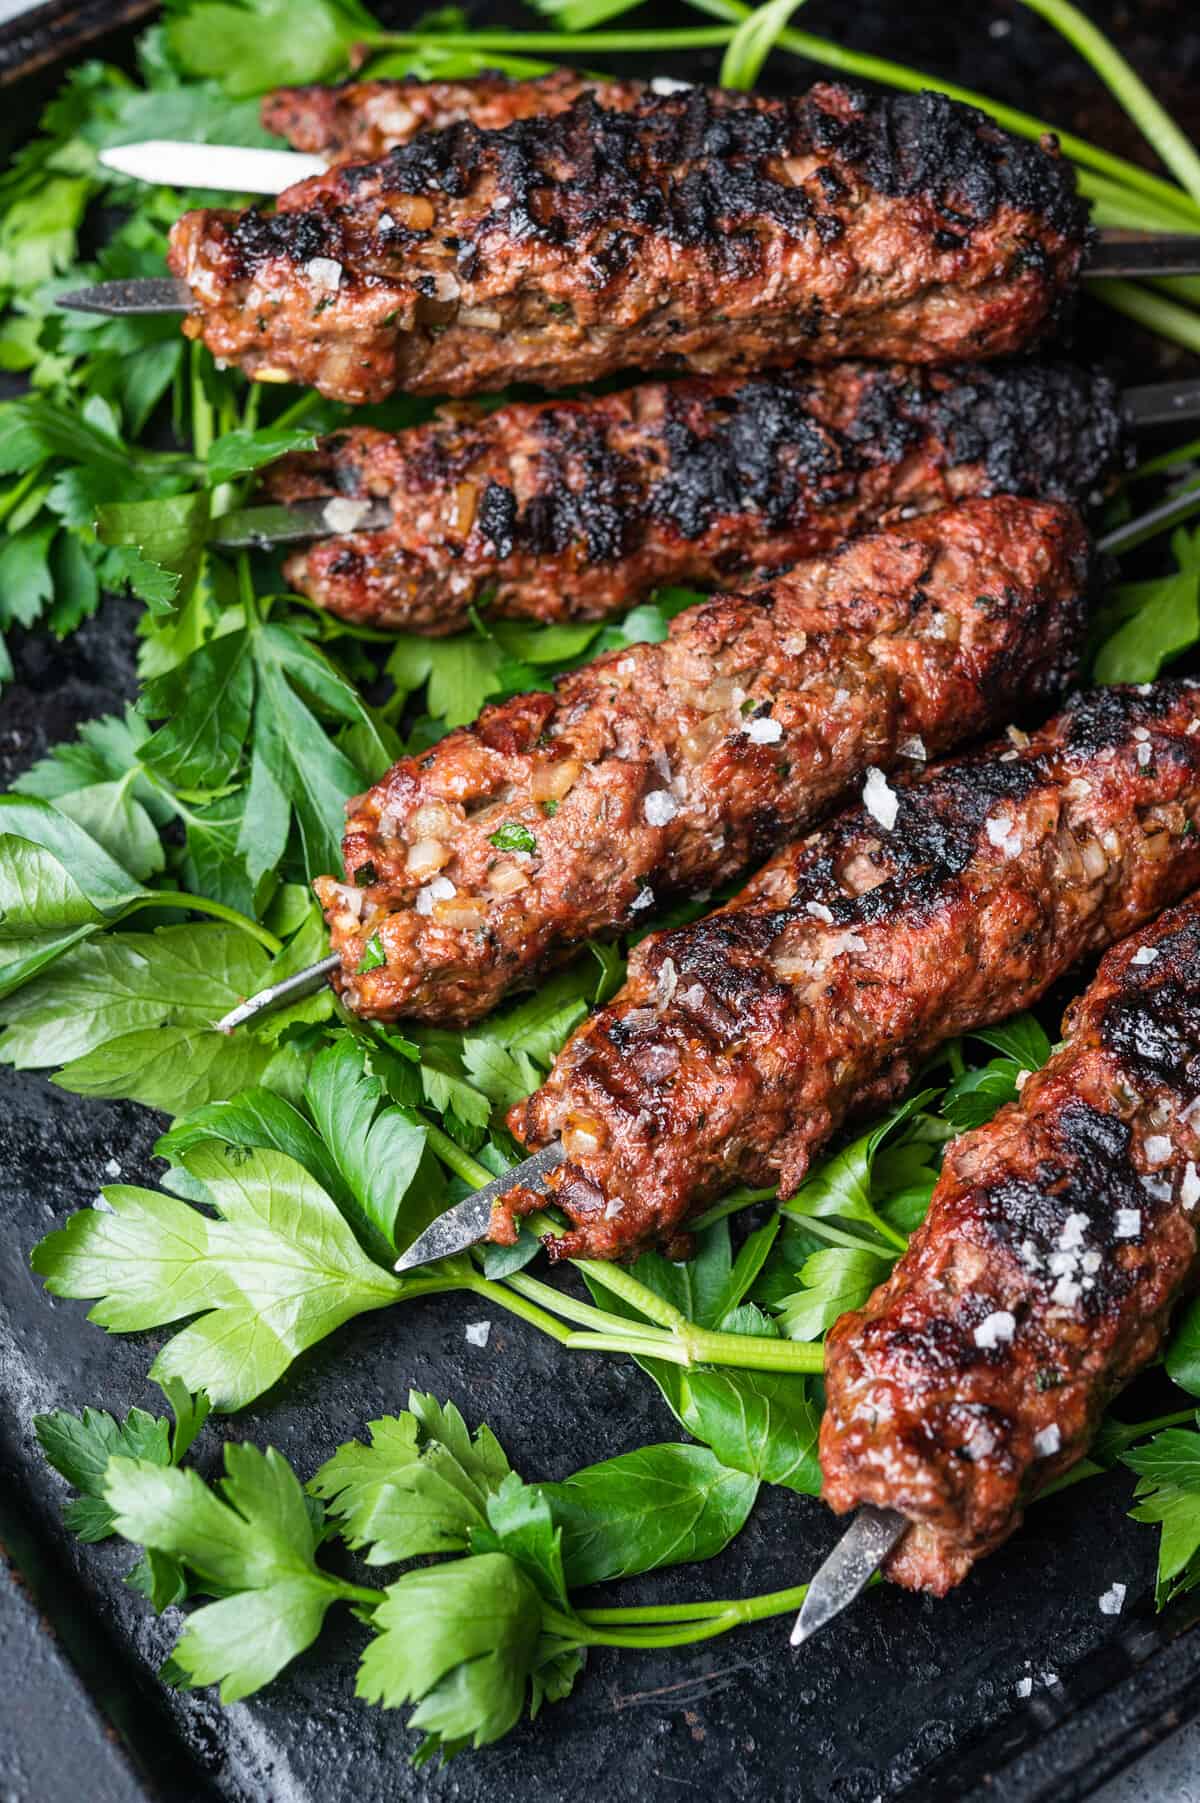 Charred lamb mince on metal skewers sat on a bed of coriander leaves.